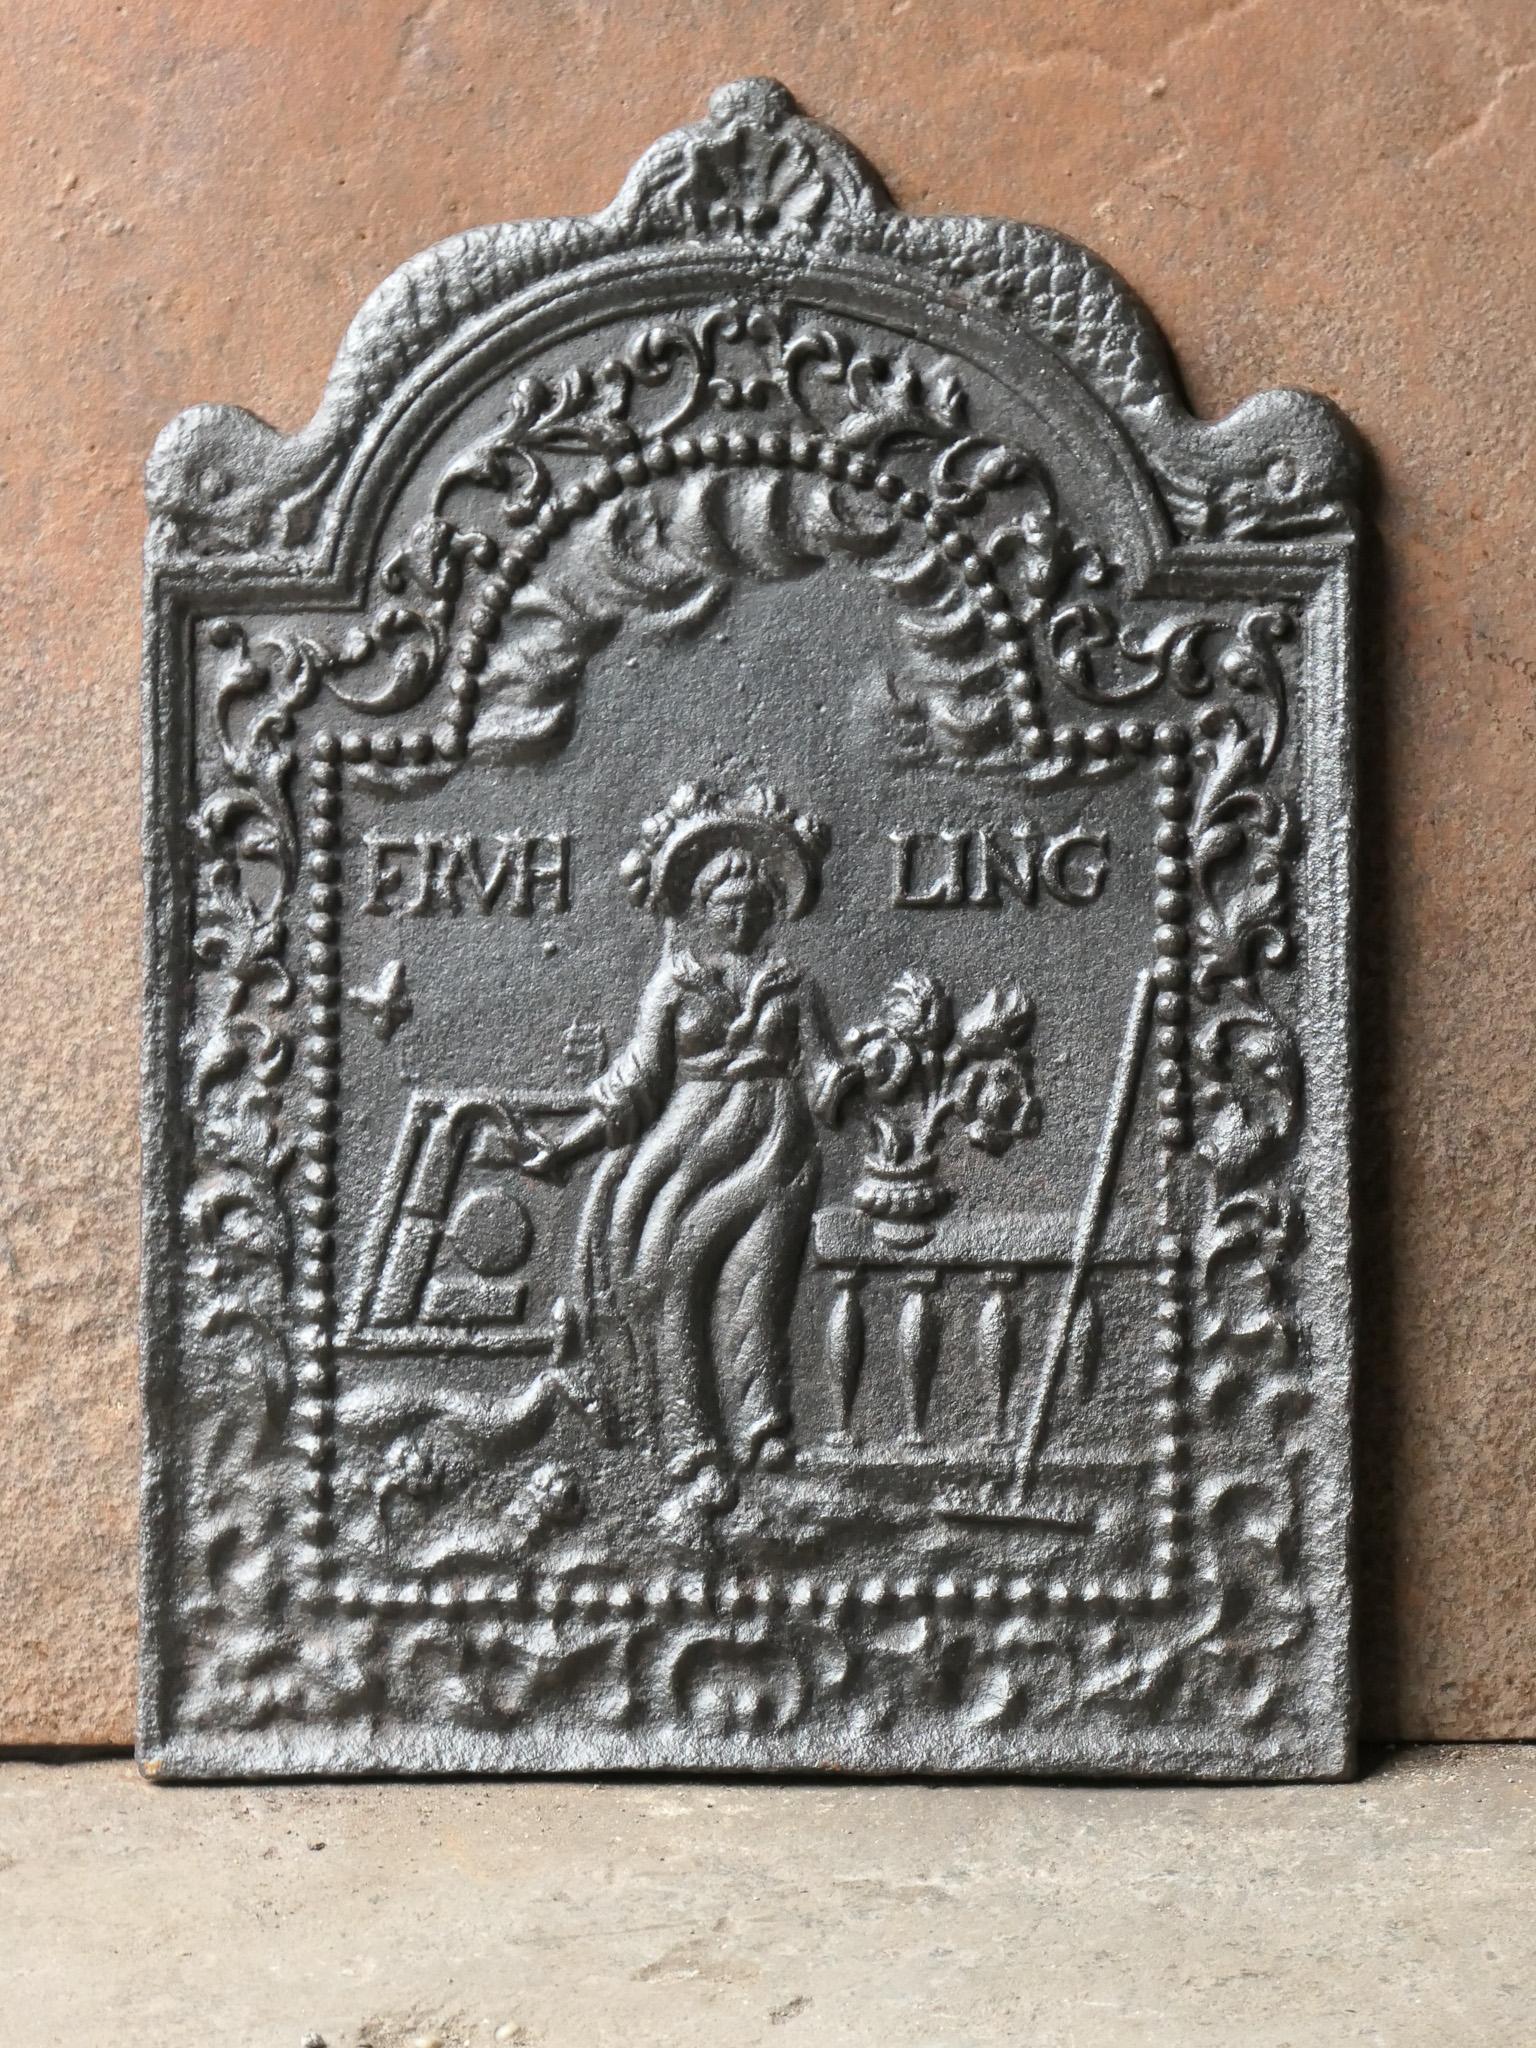 Dutch Louis XIV fireback with an allegory of Spring. The fireback is from the 17th or early 18th century. 

The fireback is made of cast iron and has a black / pewter patina. The fireback is in a good condition and does not have cracks.

